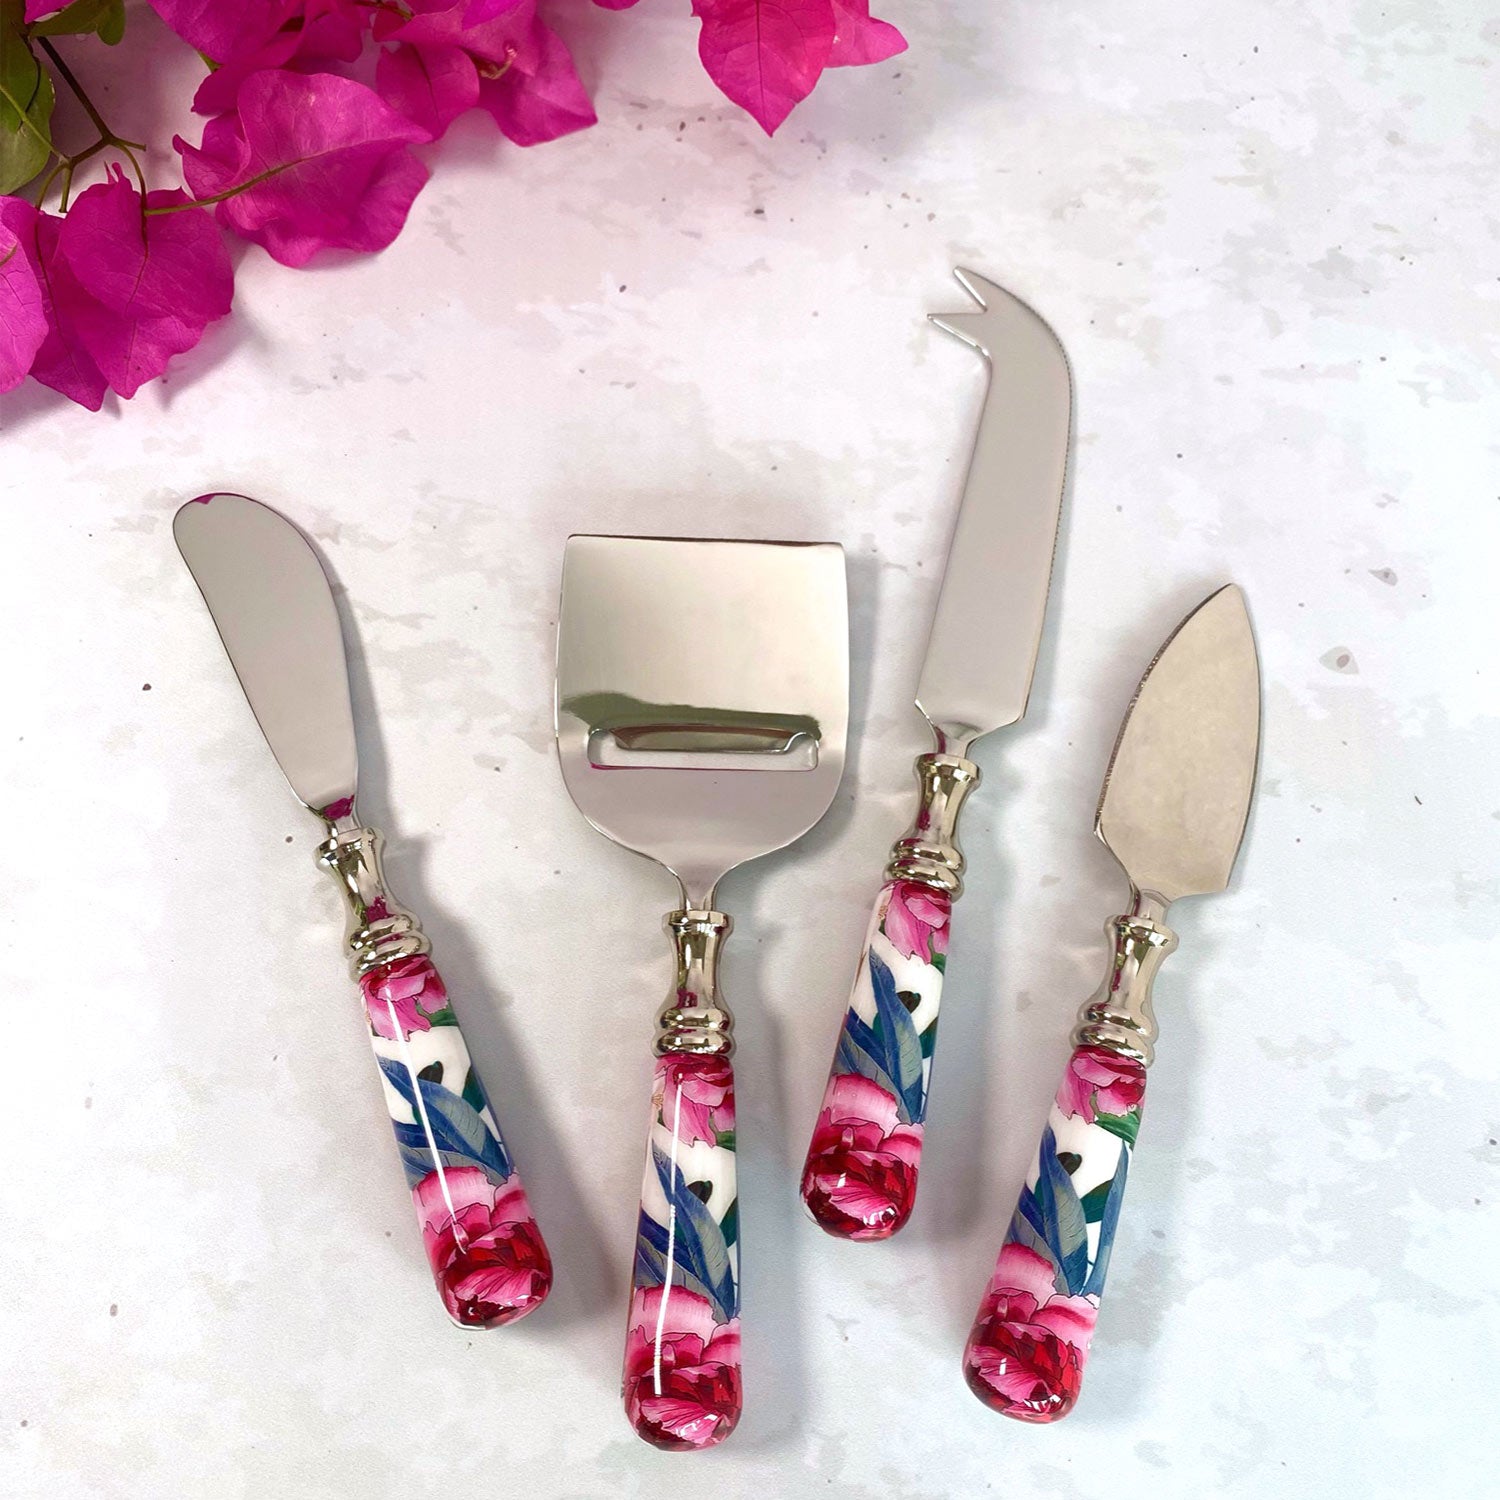 Serving Cutlery, Gift Set of 12 - Tudor Blooms